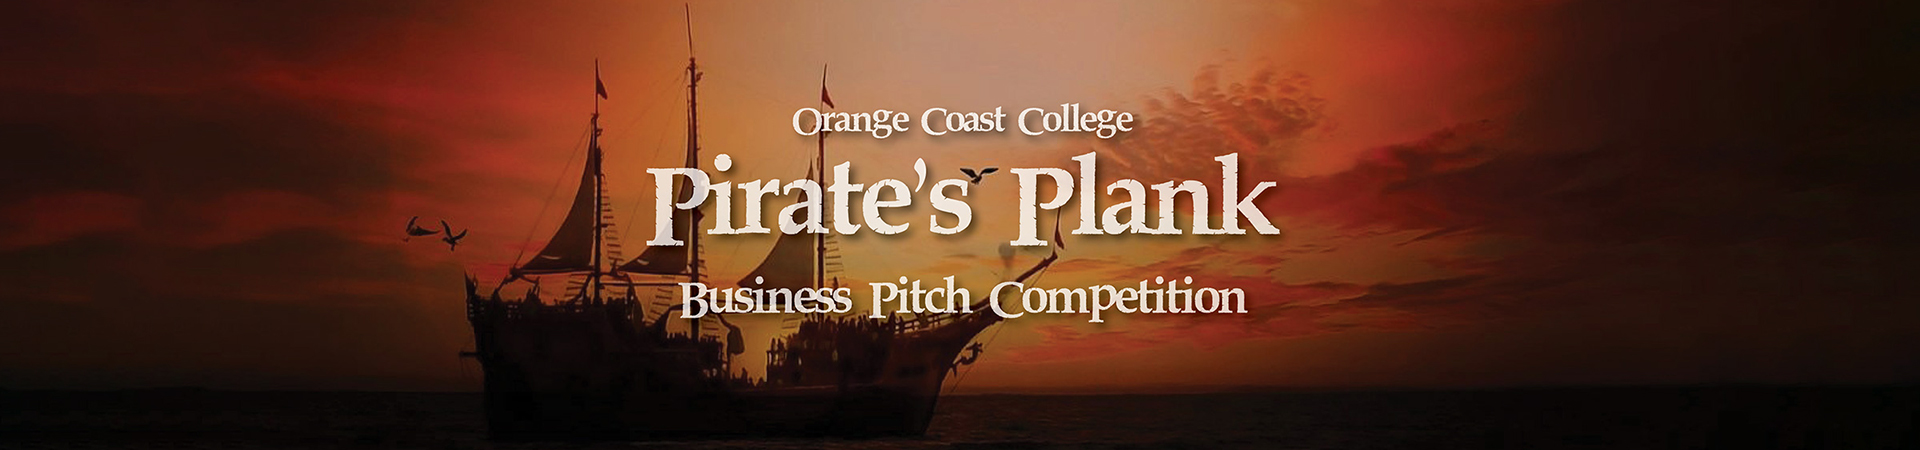 OCC Pirate's Plank Business Competition with sailing ship in background